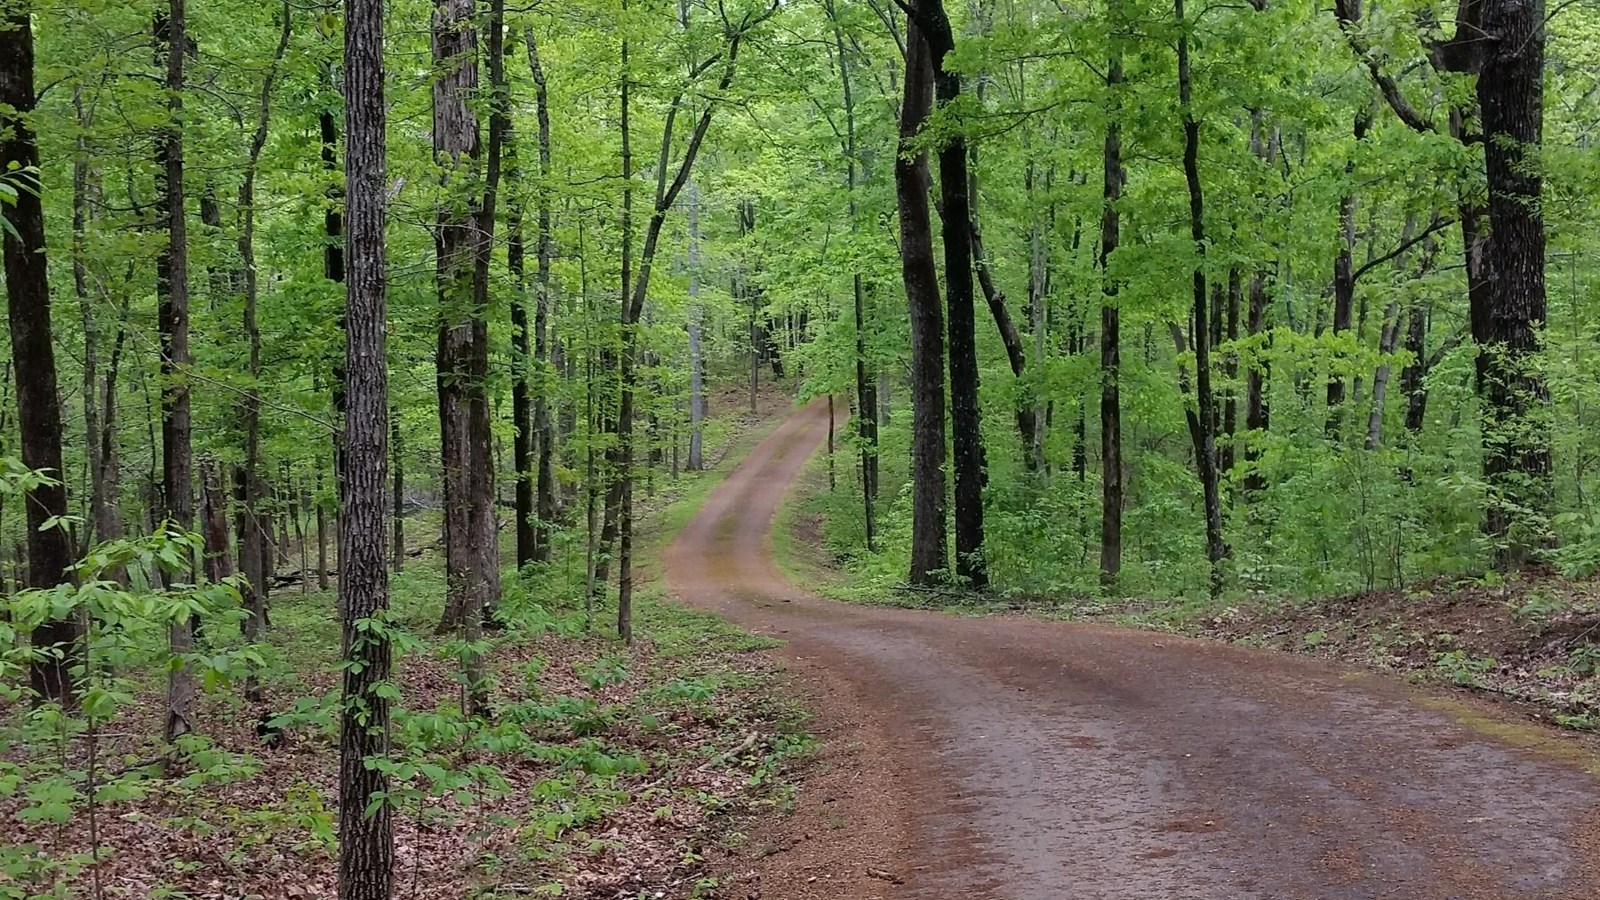 A rustic road through a forest with new growth leaves.